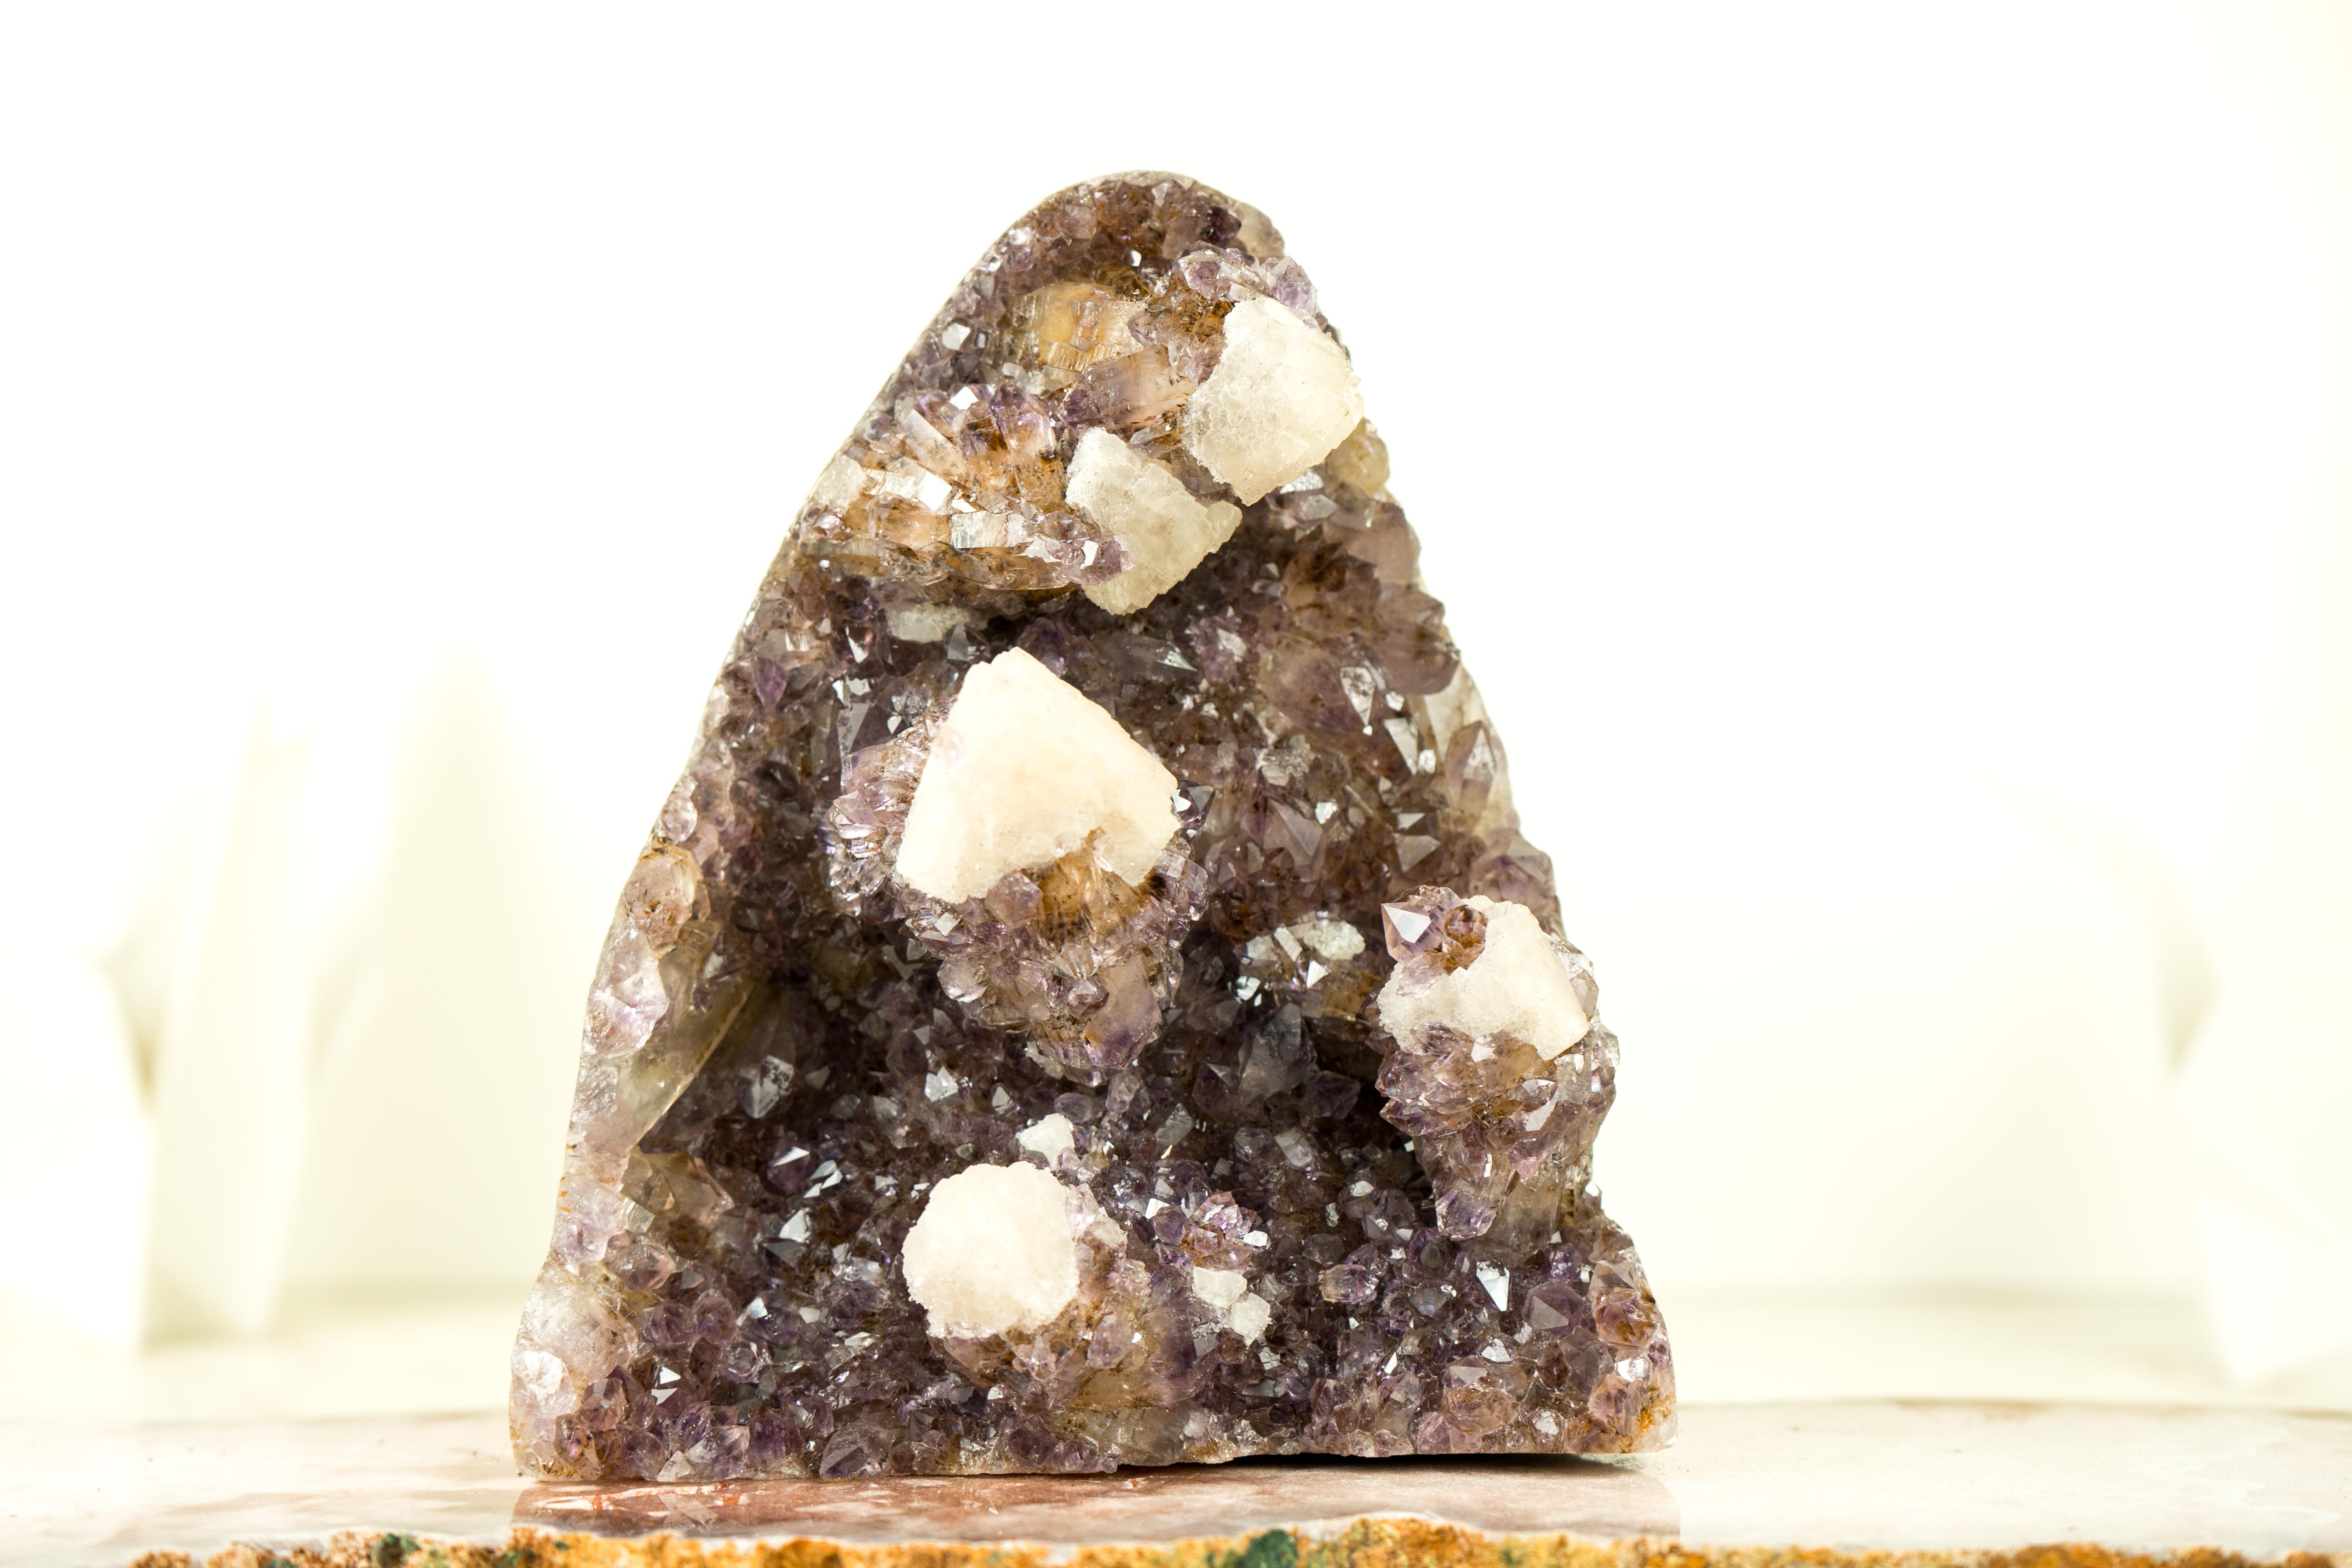 Stunning Uruguayan Amethyst Cluster with Calcite

▫️ Description

An Amethyst cluster showcases a beautiful formation of geometrical Calcite, accompanied by a luxurious lavender shade of purple. This Amethyst with Calcite specimen should be